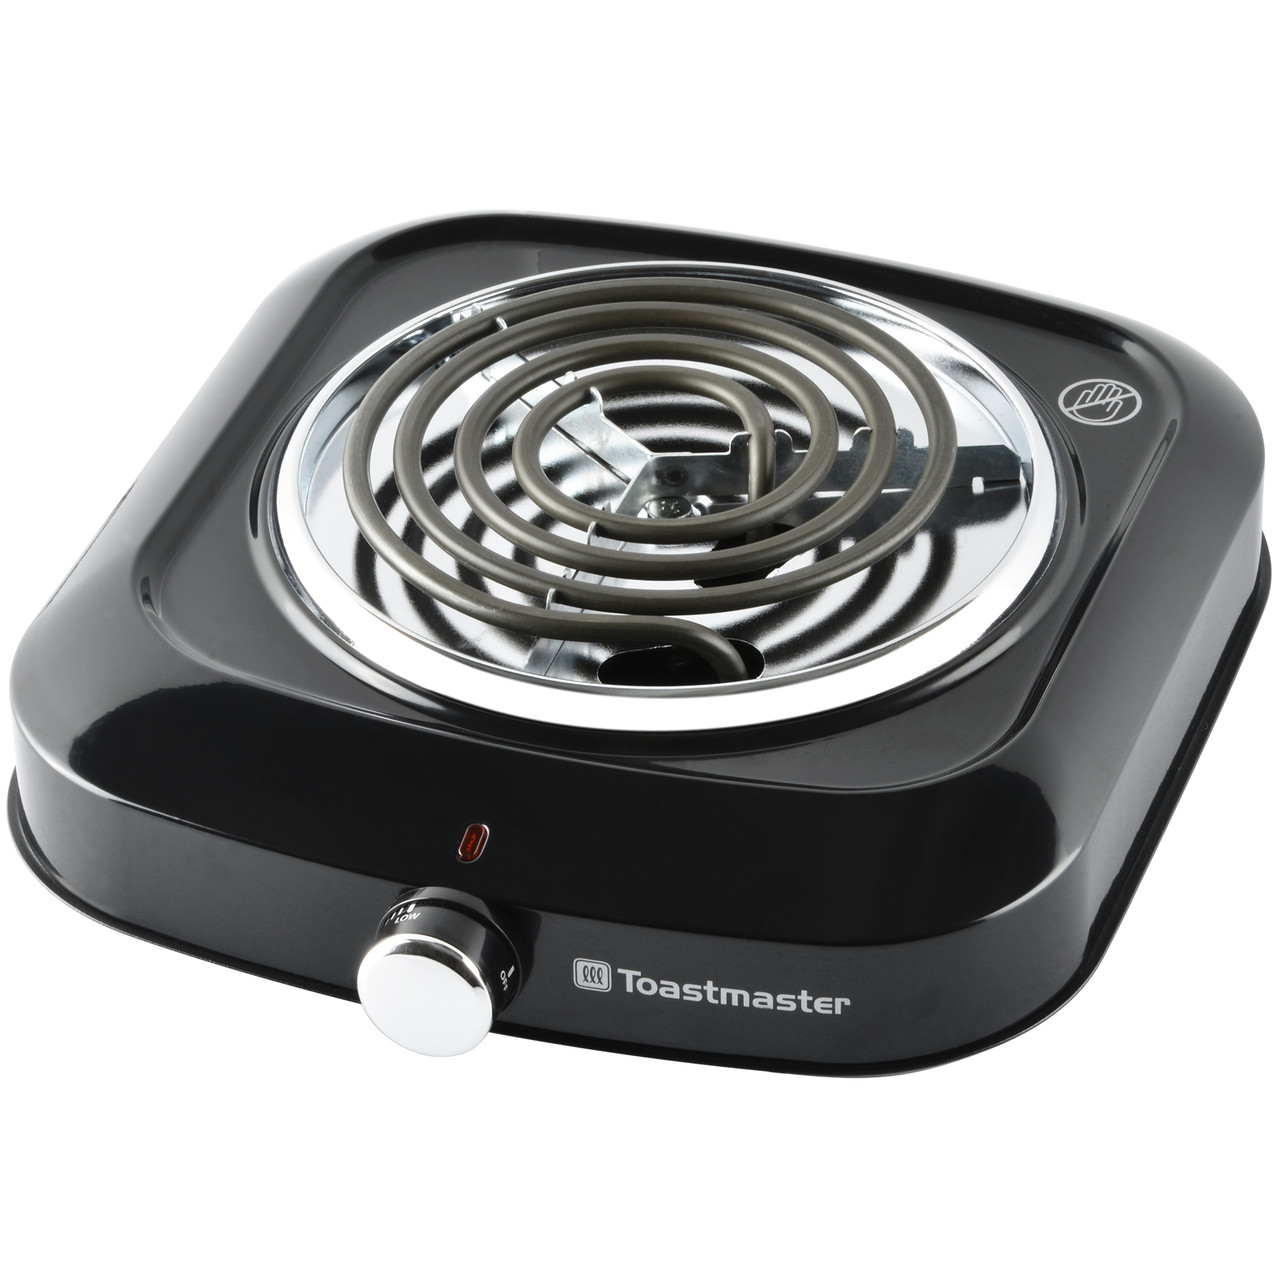 Mainstays Portable 2 Coil Burner Electric Table Top Hot Plate Cooker